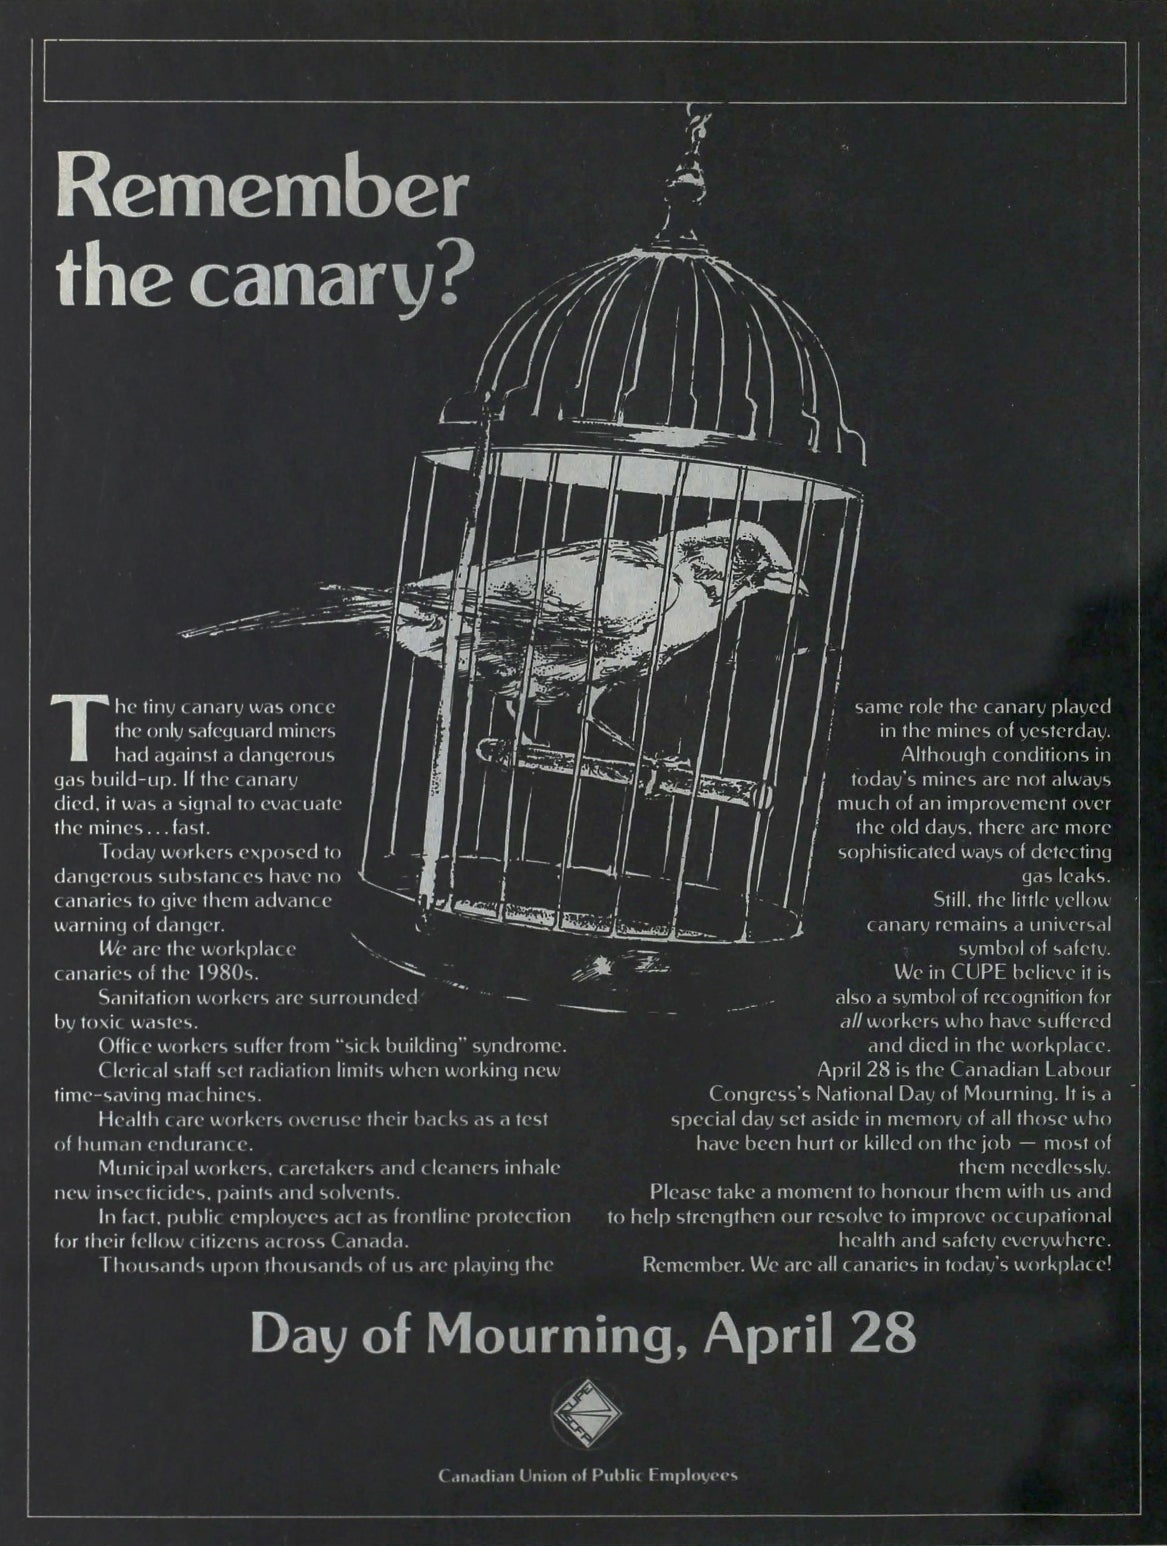 Early ad for the Canary